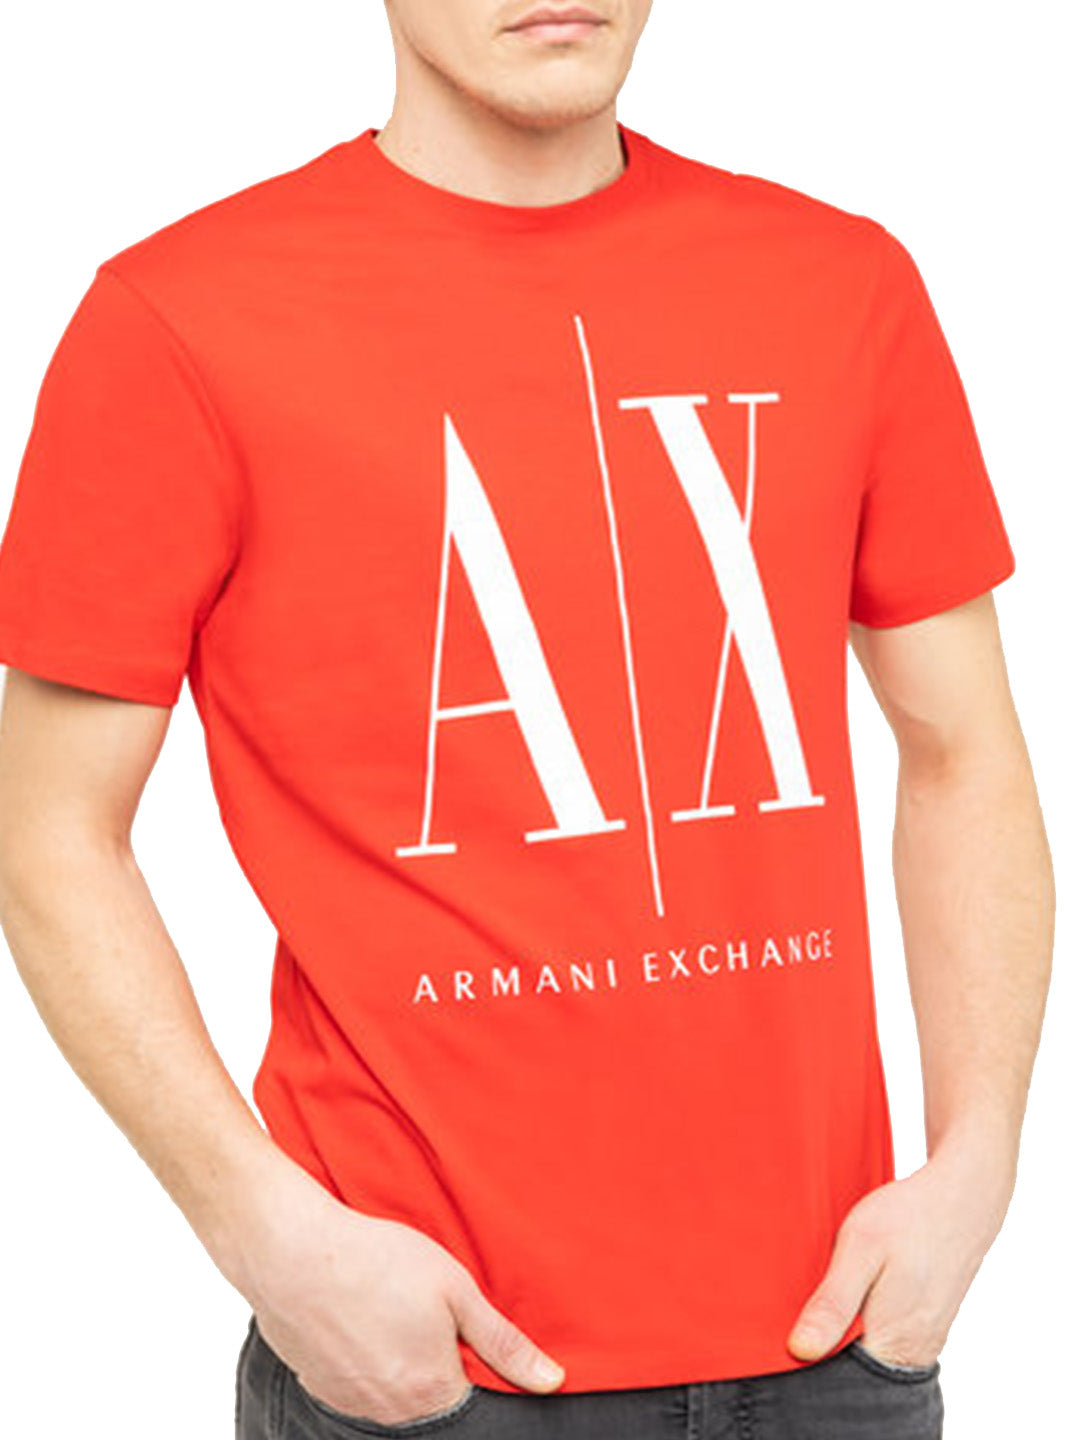 ARMANI EXCHANGE red/white cotton T-shirt – To Be Outlet